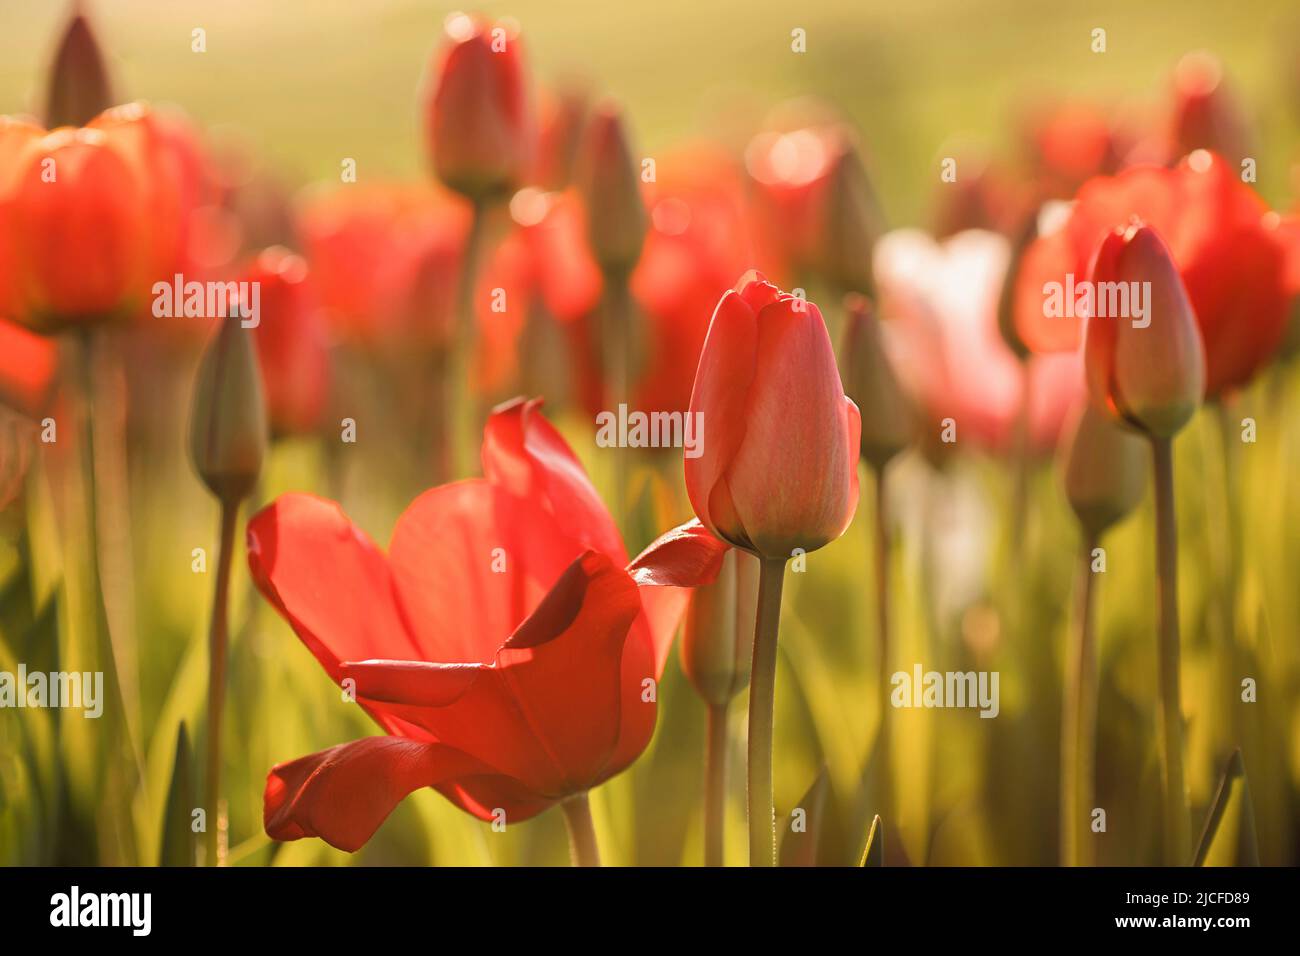 Spring, red tulips, backlight shot, Stock Photo